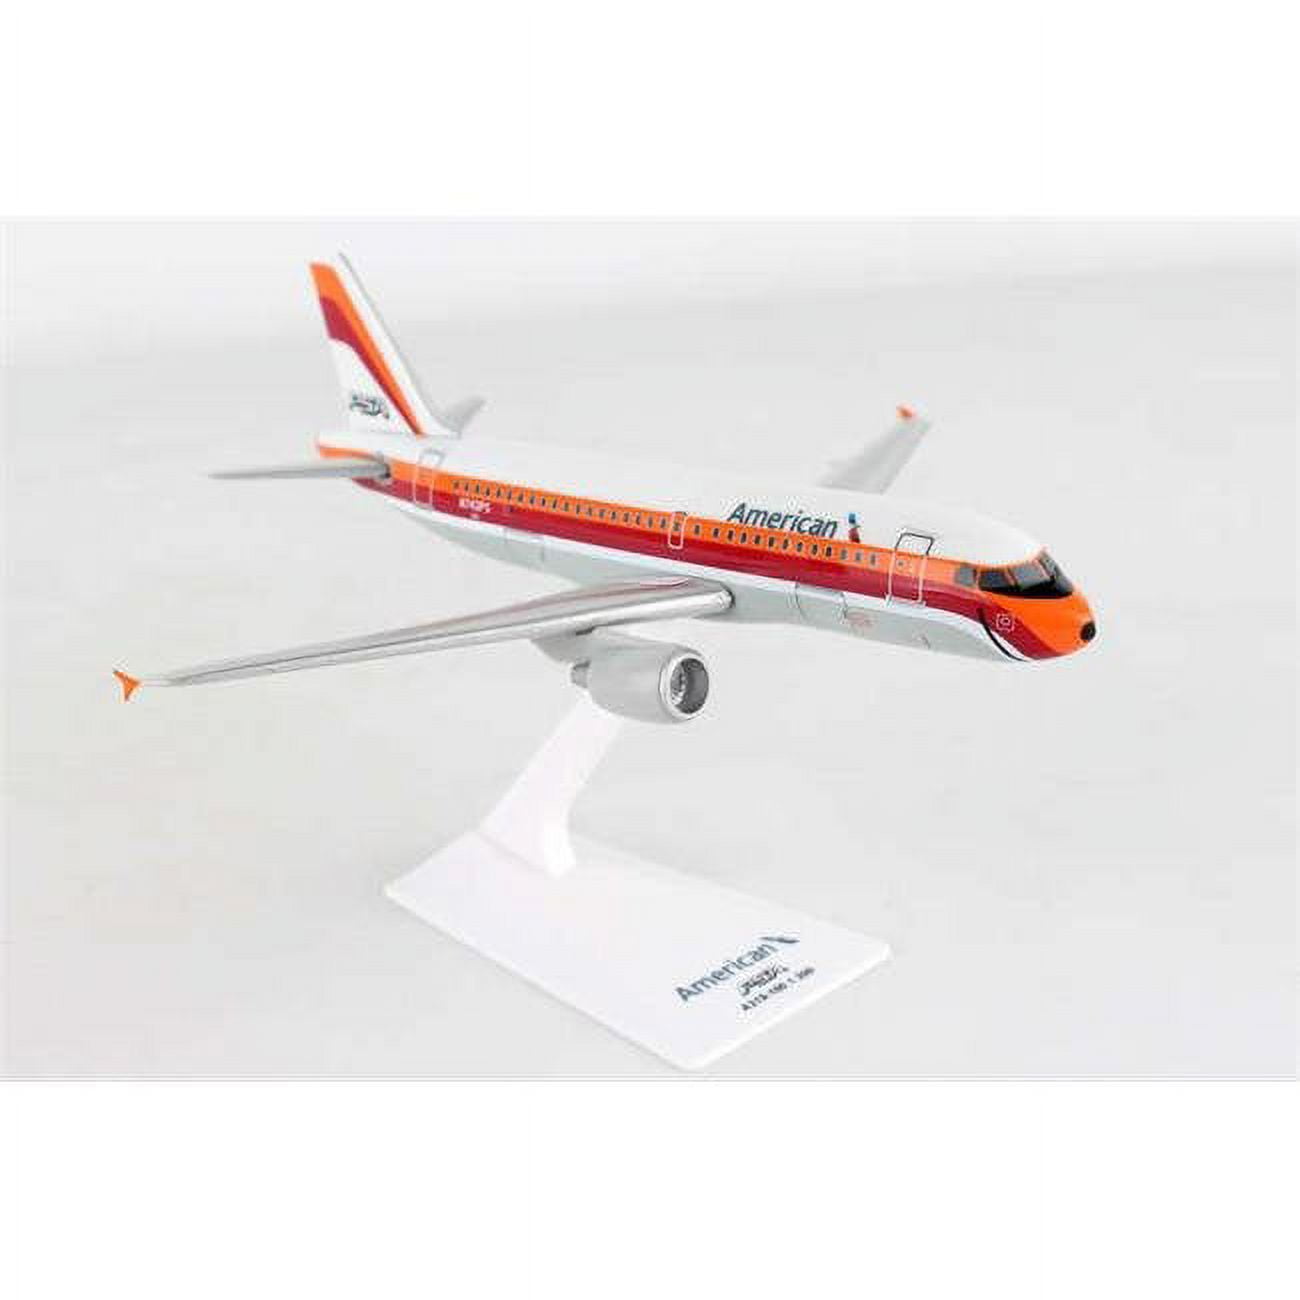 Lp0029p A319 American & Piedmont A319 1-200 Heritage Livery Model Airplane